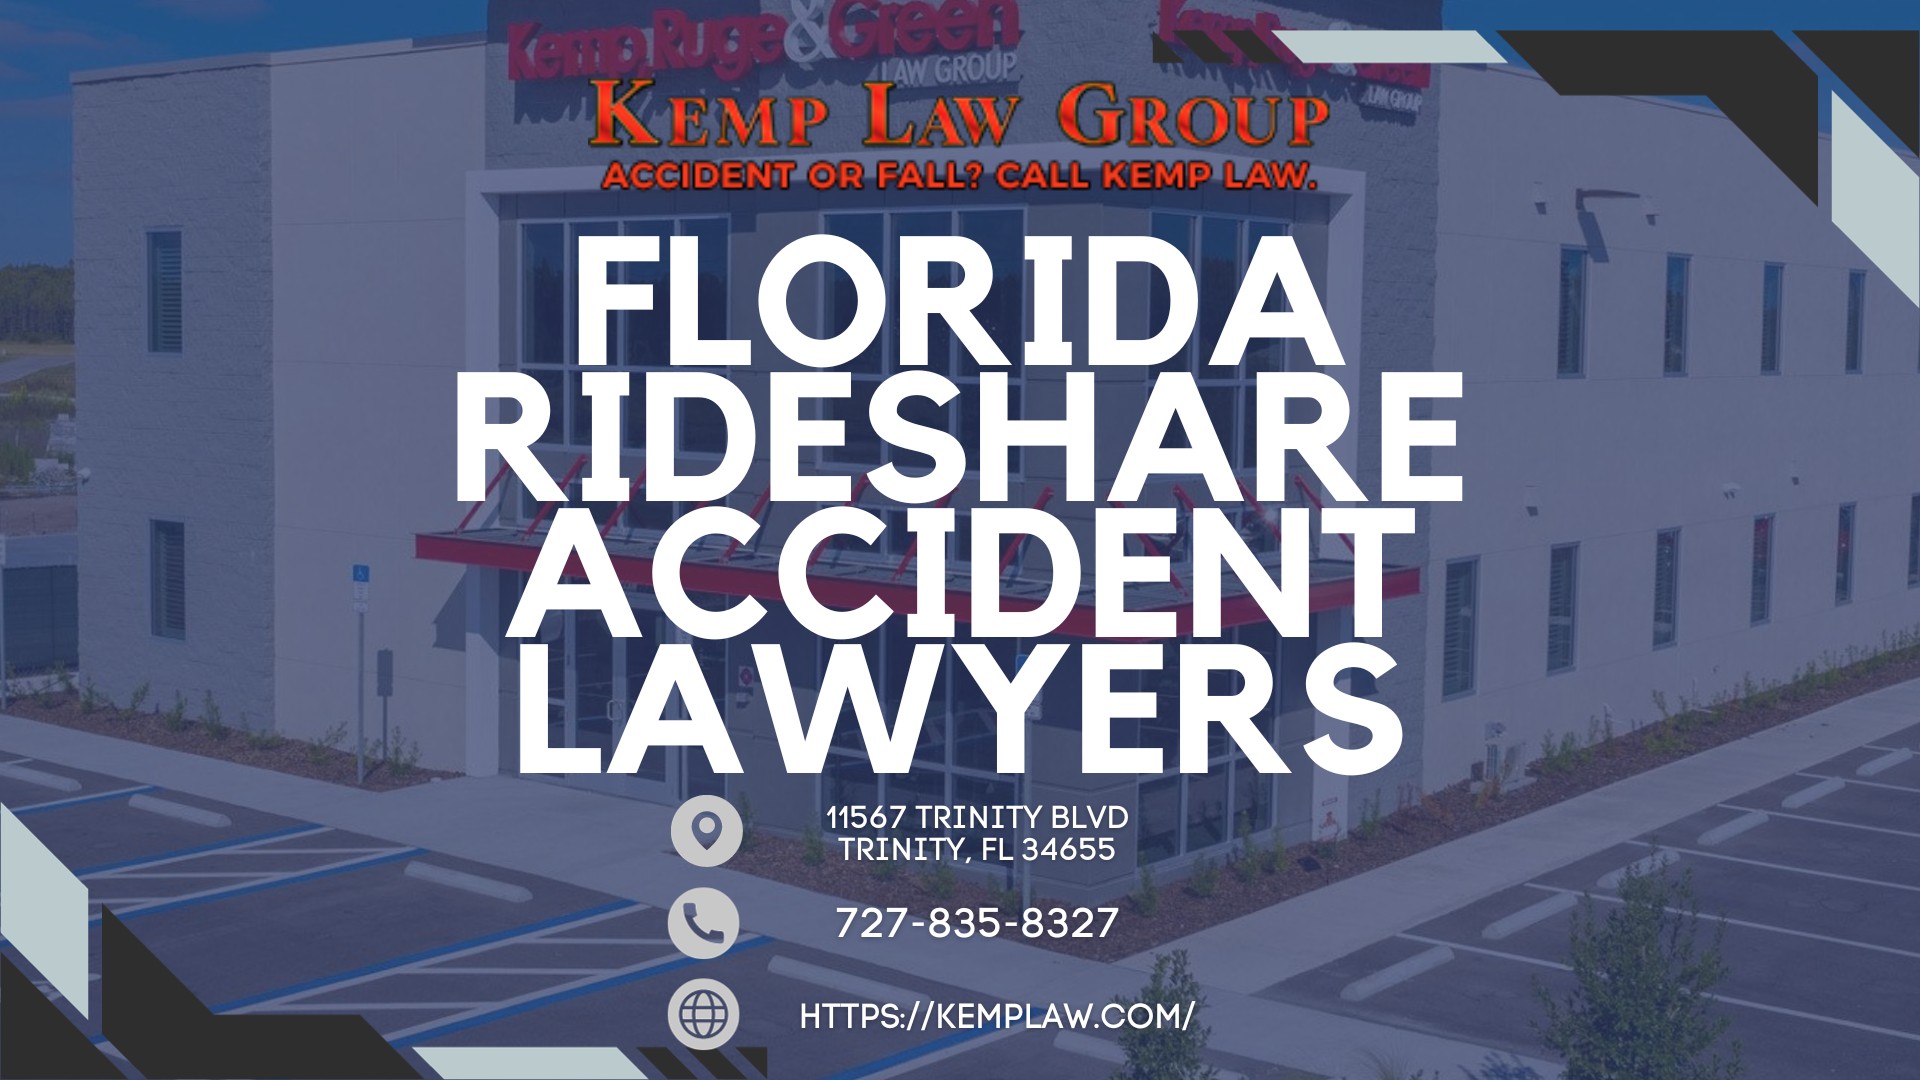 Fort Lauderdale Injury Attorney Targets Rideshare Accidents Uber Lyft Amp Bus 656188c77f02c 